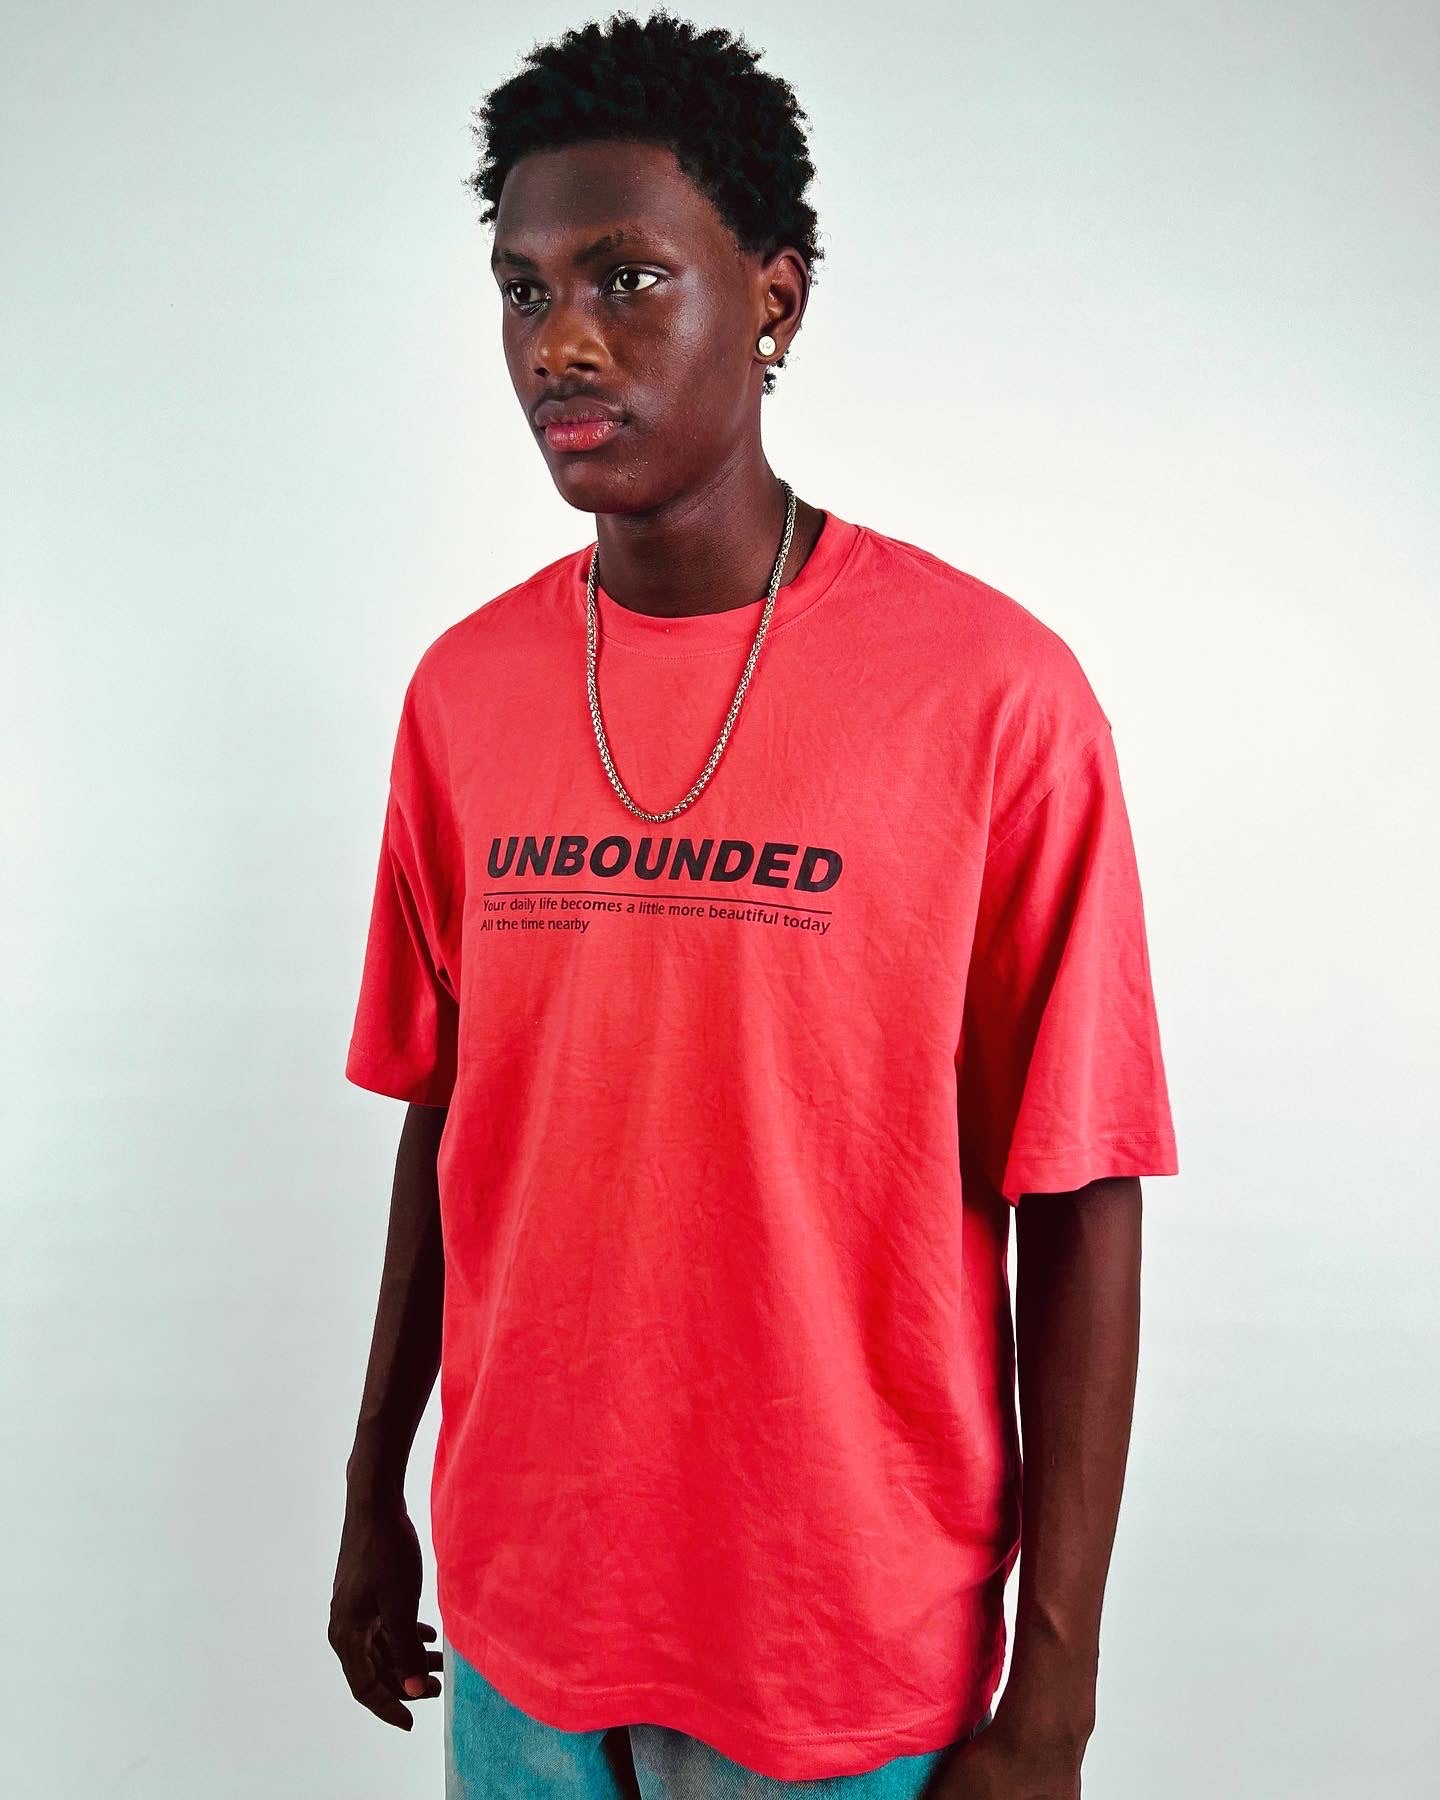 Unbounded script T-shirt in hot pink